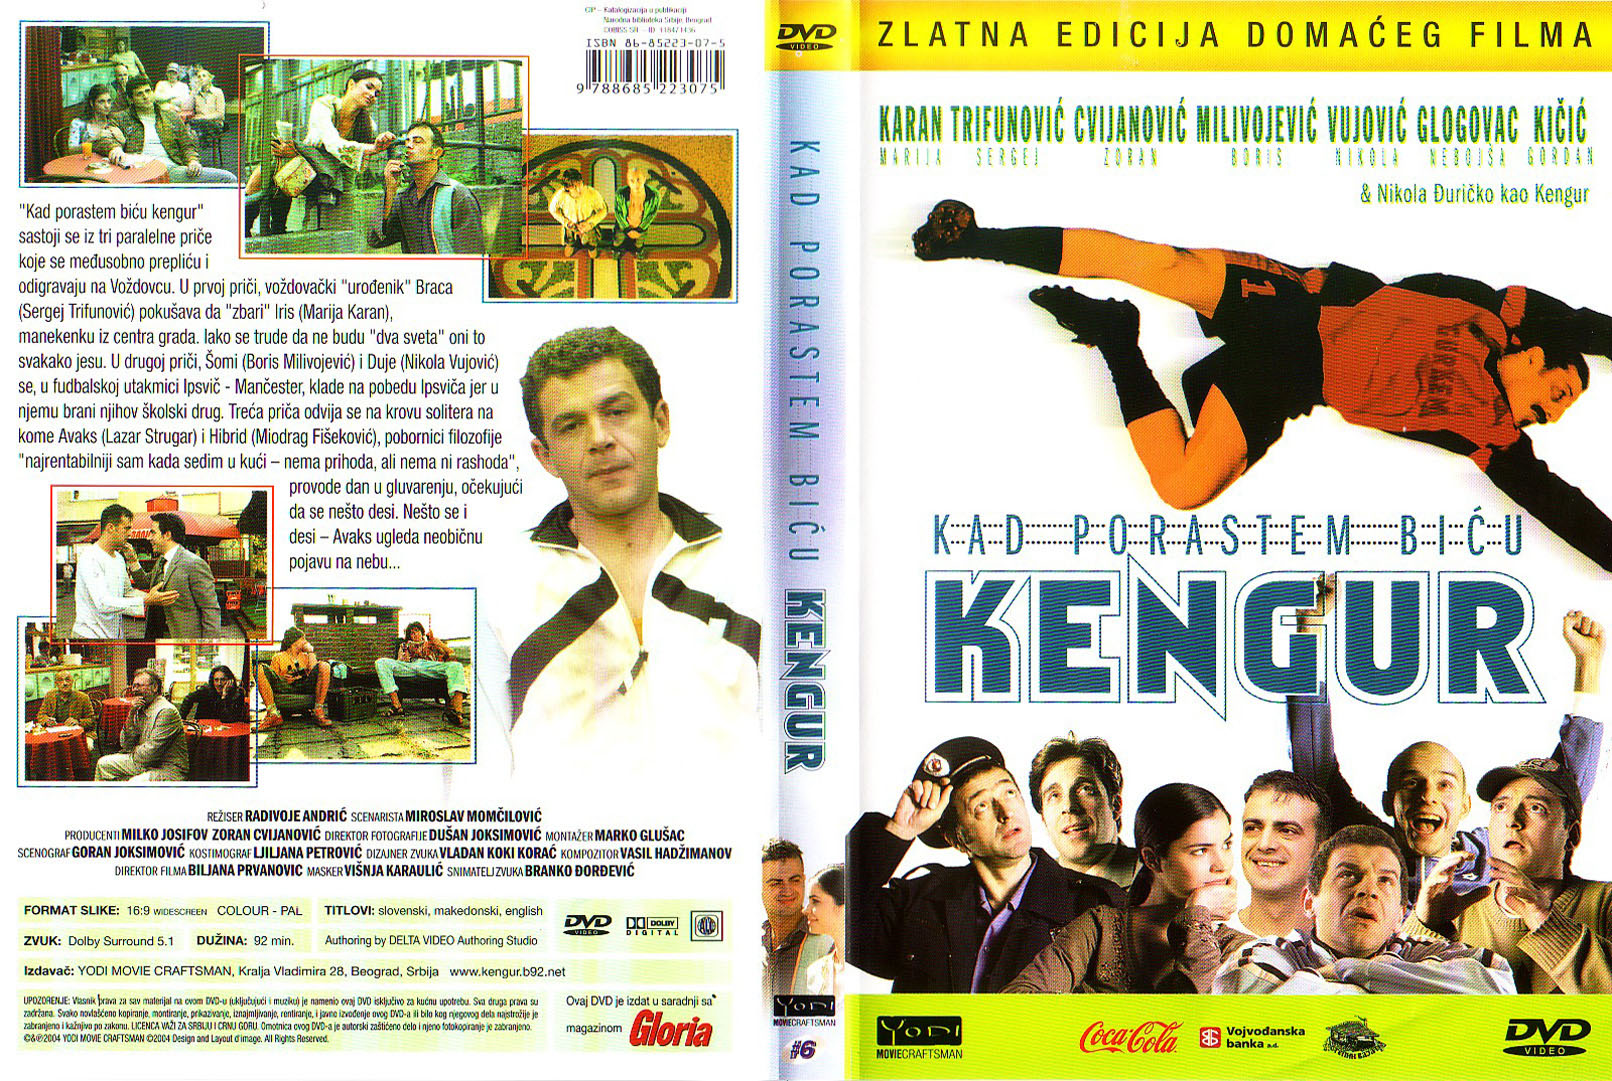 Click to view full size image -  DVD Cover - 0-9 - DVD - KAD PORASTEM BICU KENGUR - DVD - KAD PORASTEM BICU KENGUR.jpg